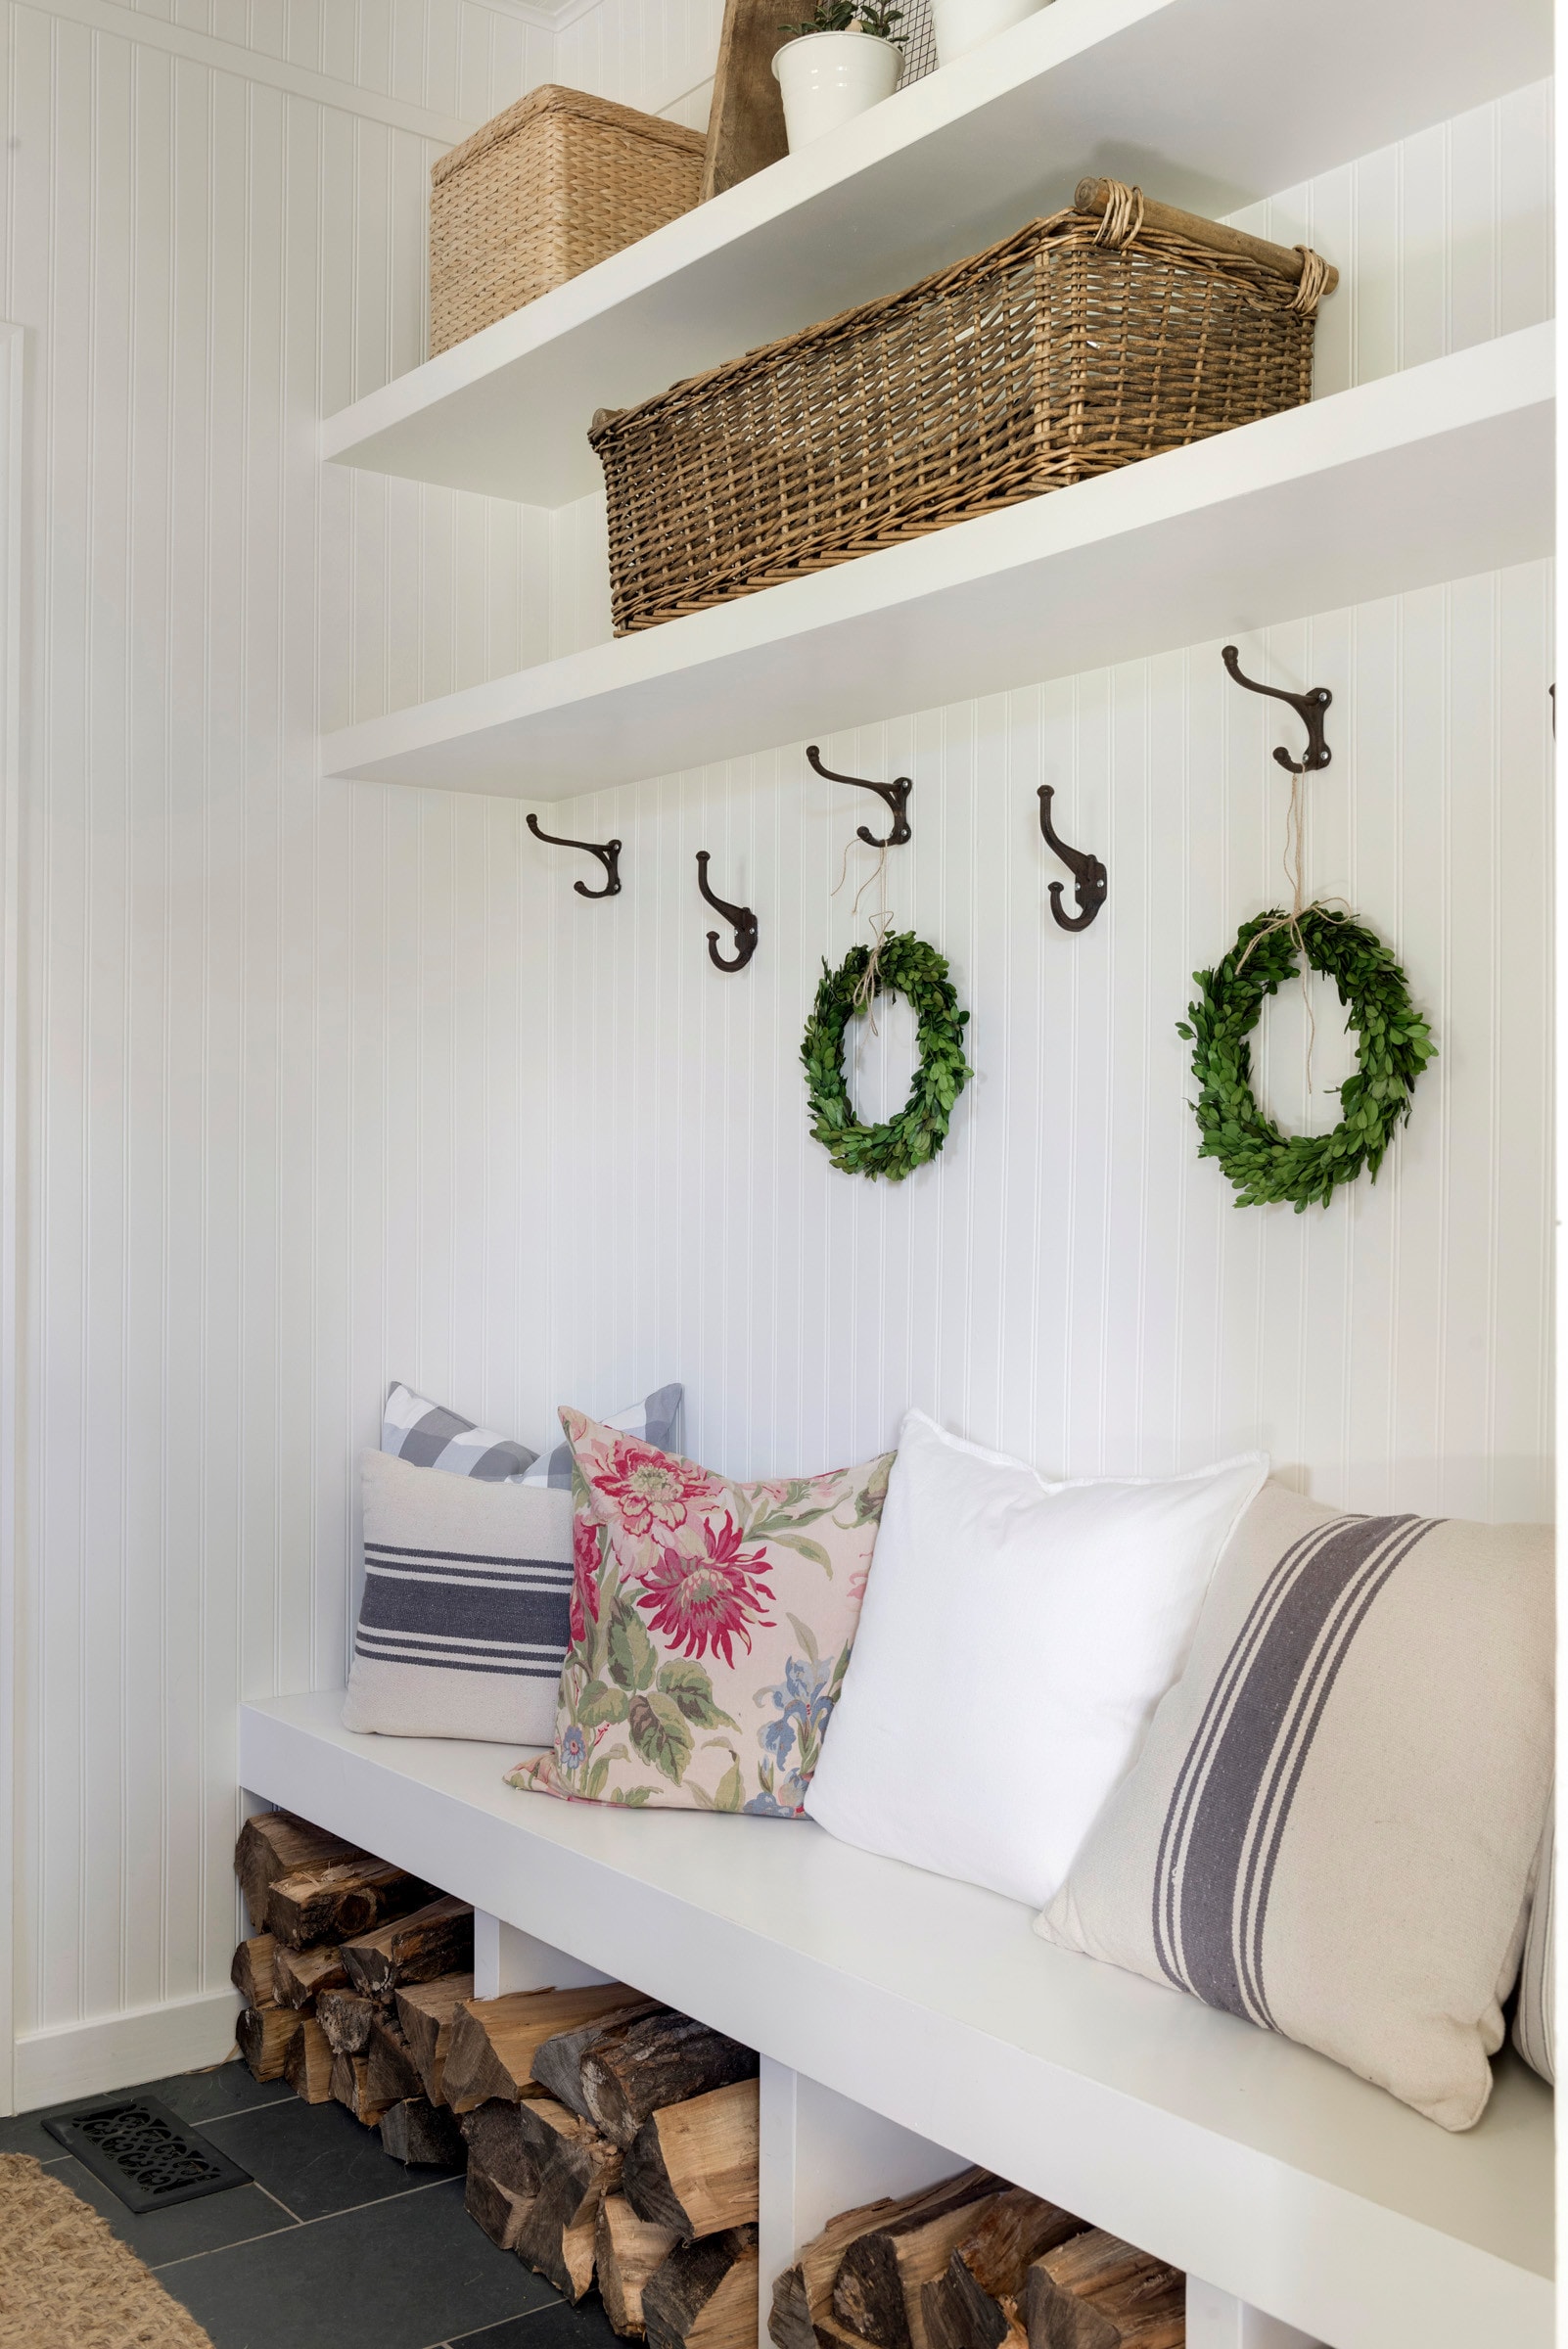 mudroom in farmhouse style featured in home tour